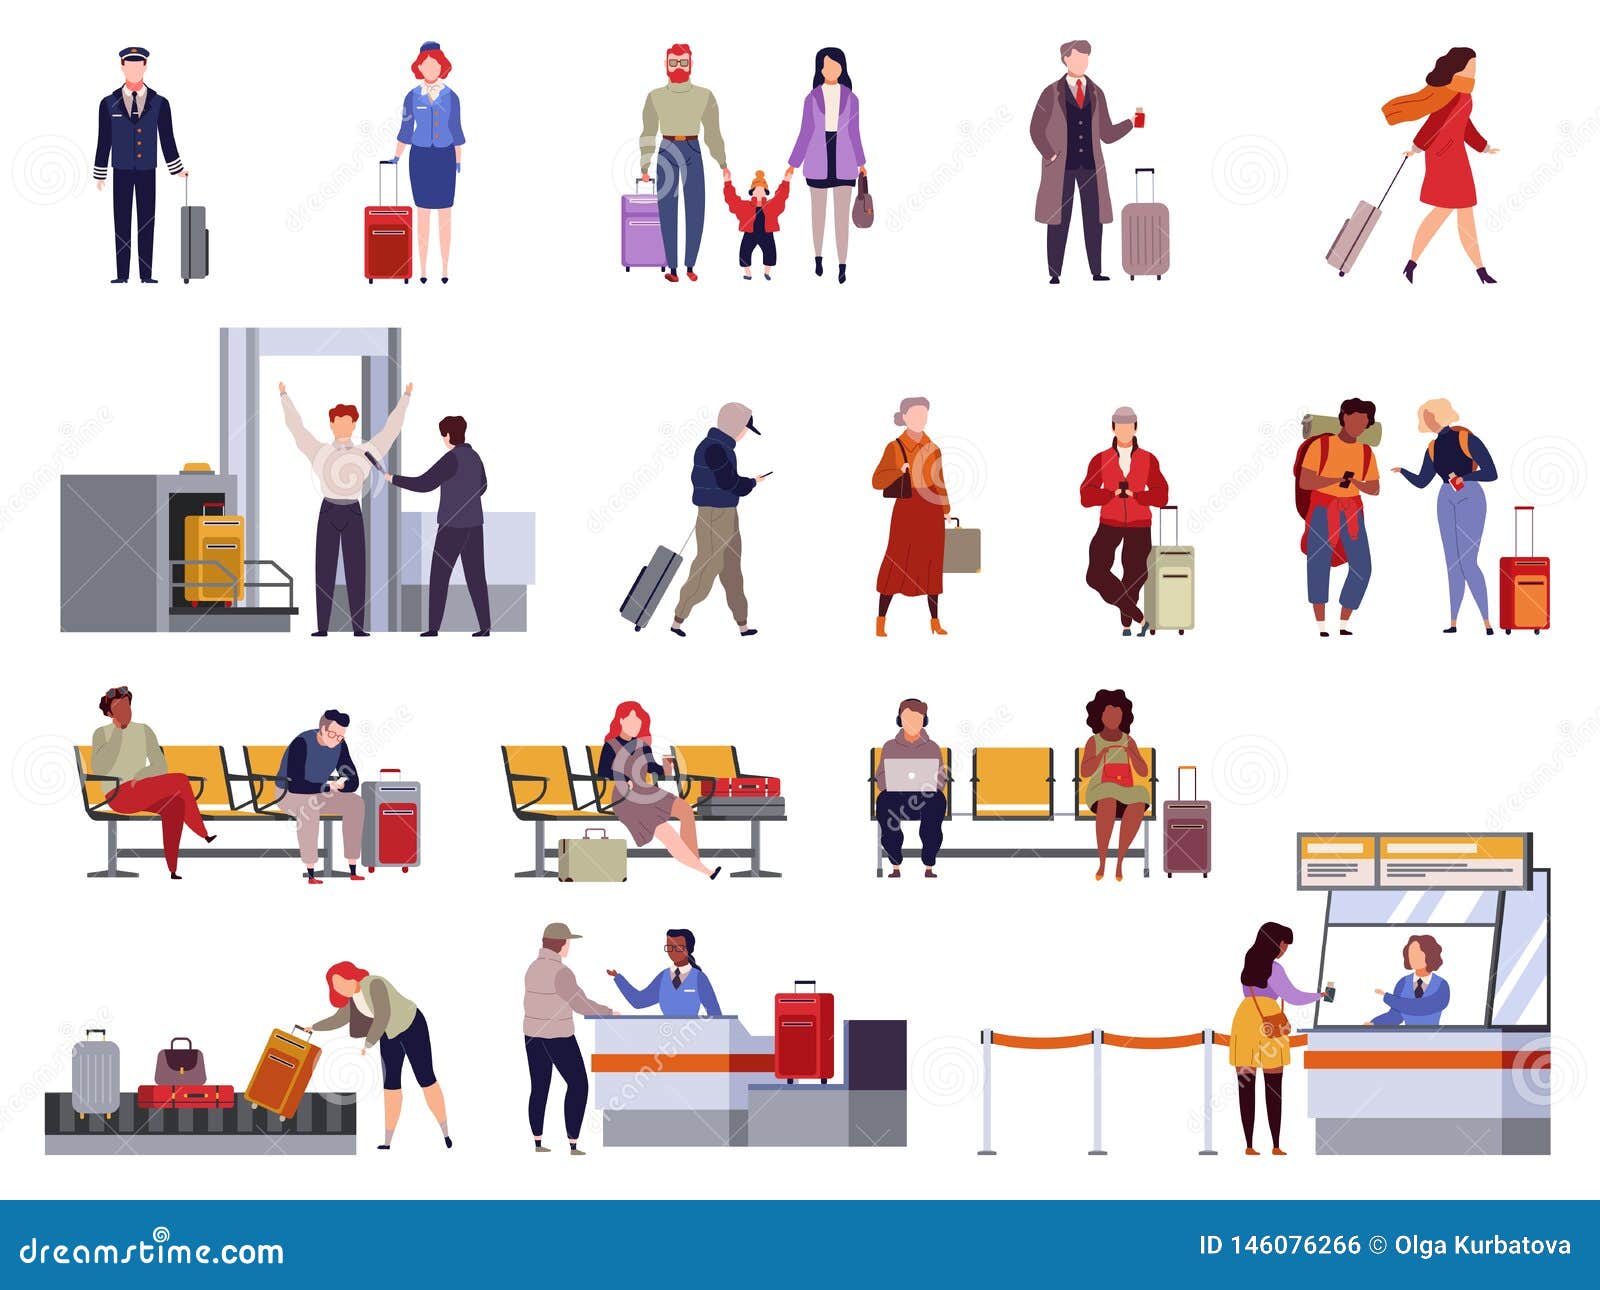 people airport set. family travel registration passport control checkpoint security airport terminal luggage passenger